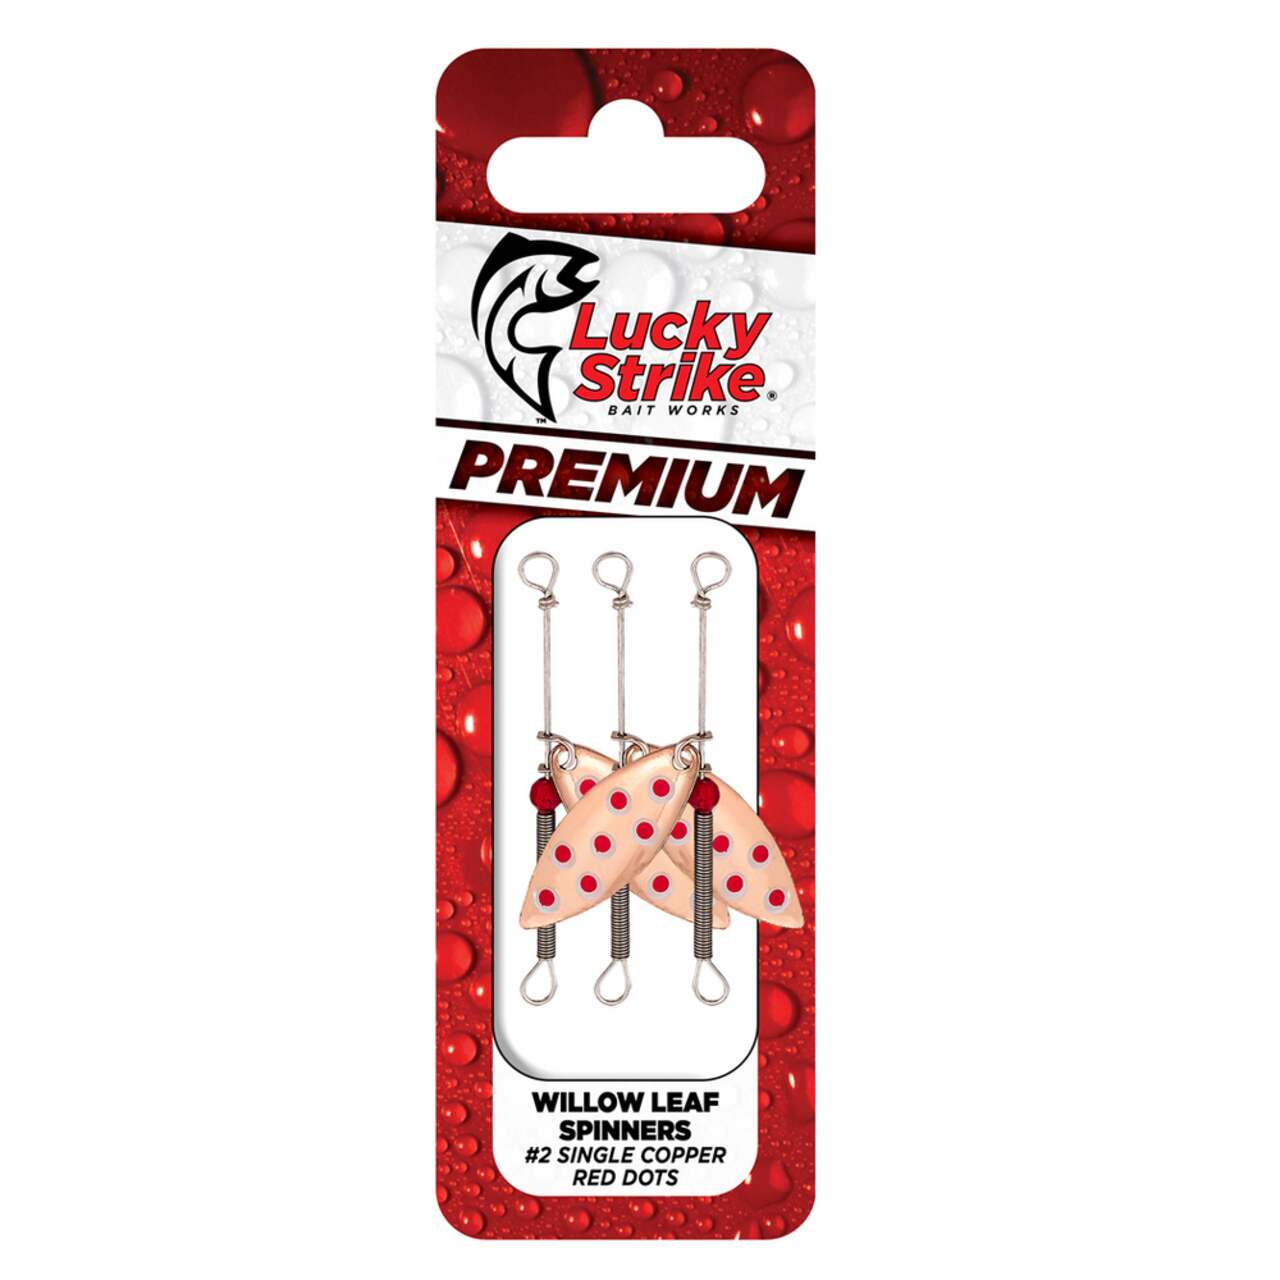 https://media-www.canadiantire.ca/product/playing/fishing/fishing-lures/0777678/lucky-strike-willow-leaf-spinner-single-copper-red-size-2-fff57142-a61f-49f2-b985-0e40cbedbcb1.png?imdensity=1&imwidth=640&impolicy=mZoom